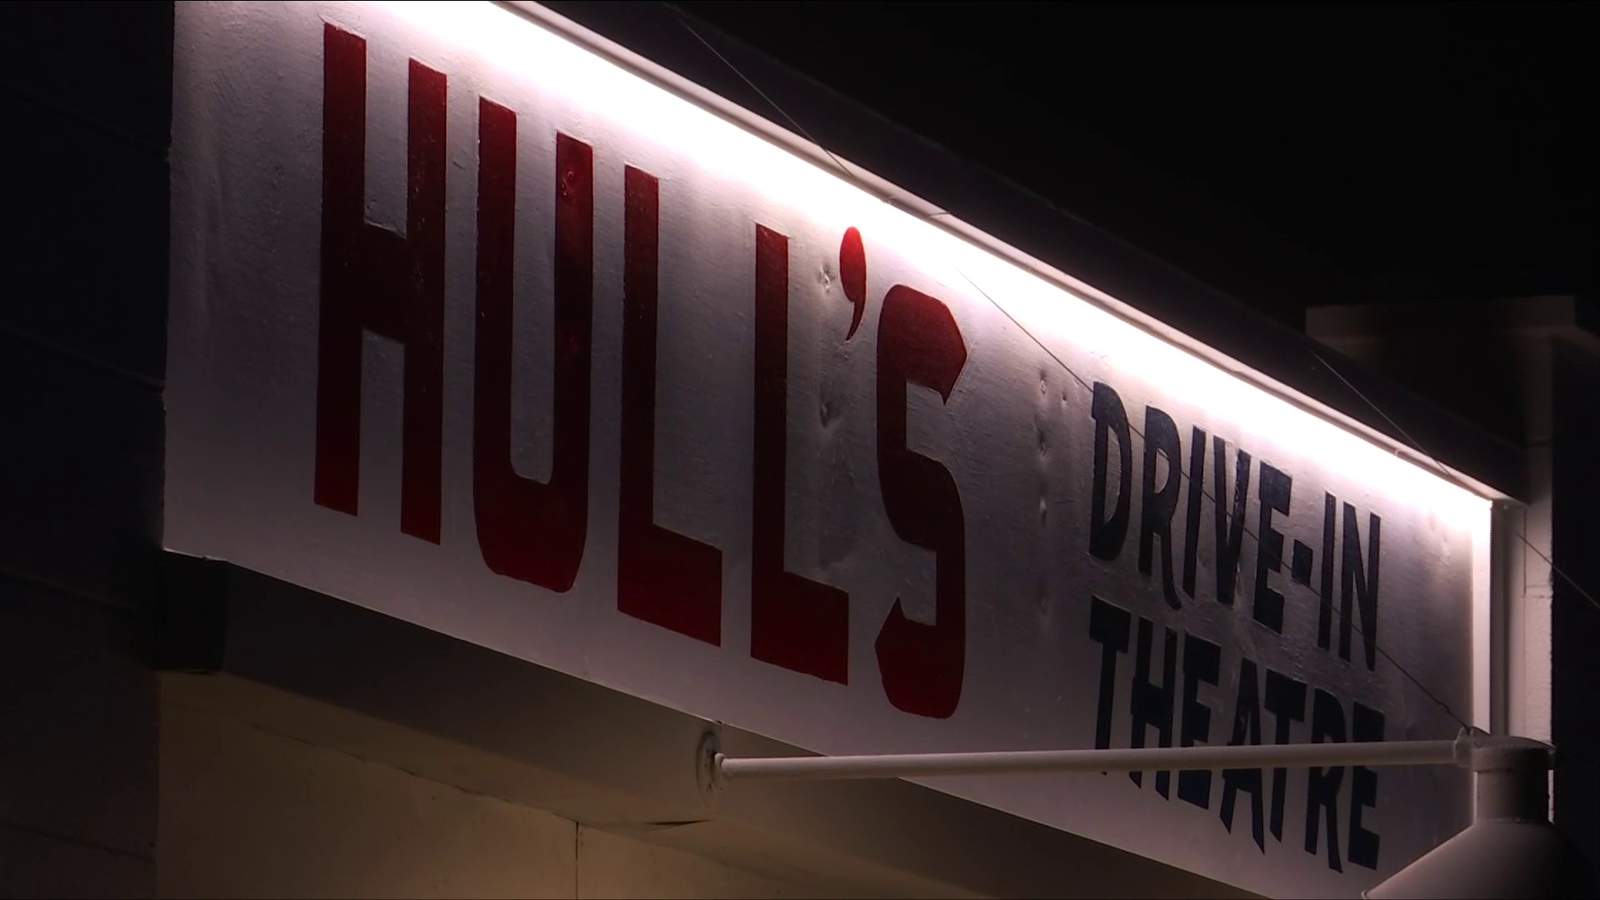 Hull’s Drive-In launches campaign to buy its land, averting possible eviction